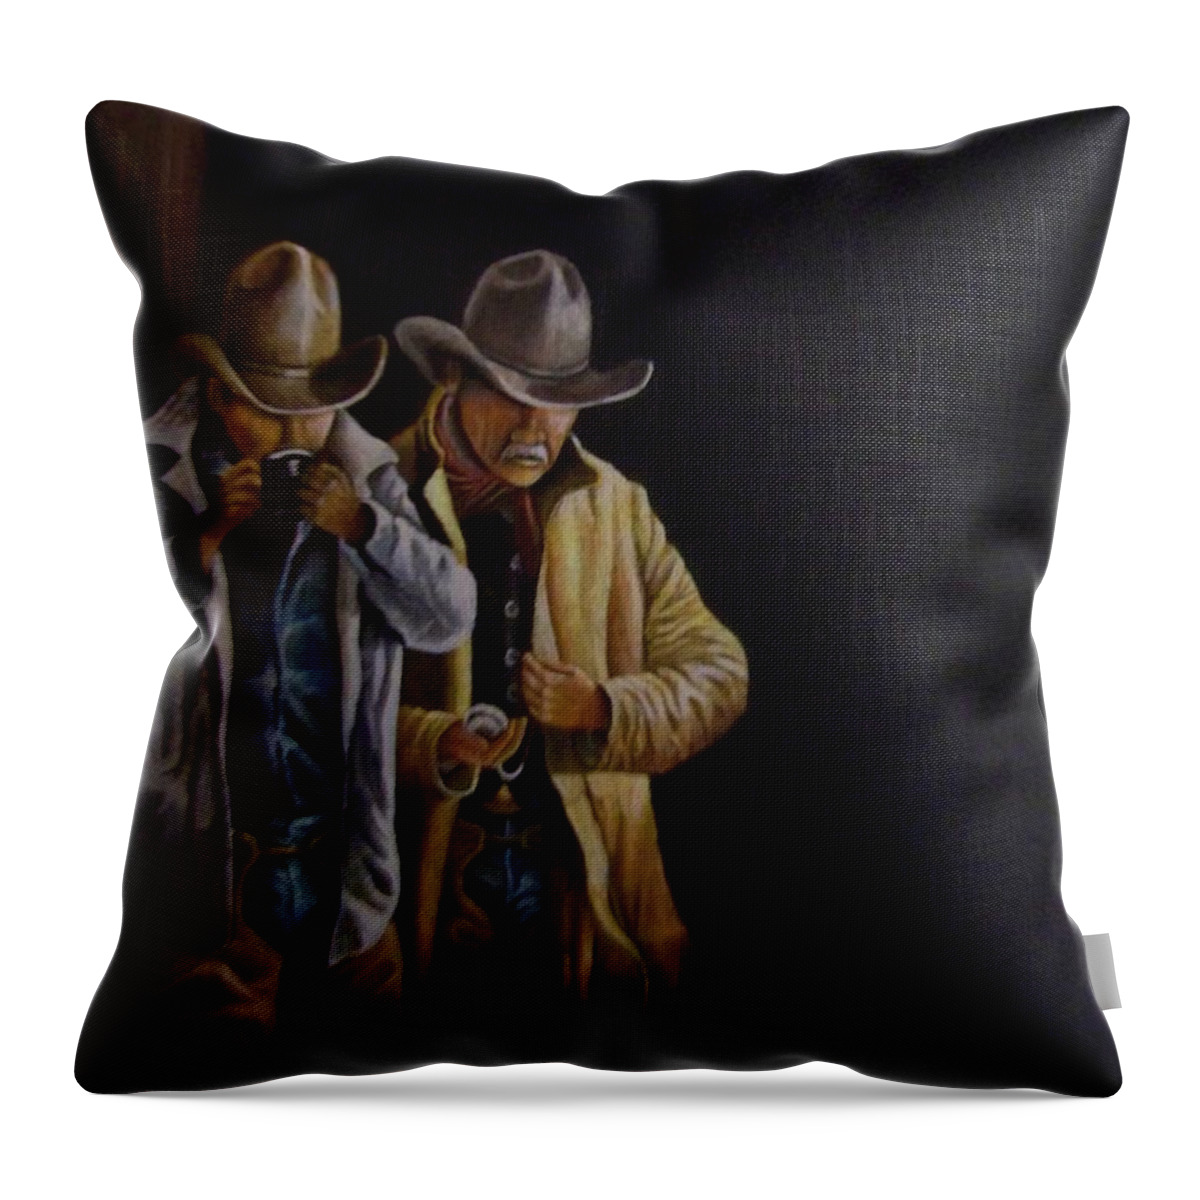 Two Cowboys Taking A Coffee Break During The Early Morning Before They Head Out To The Range. Throw Pillow featuring the painting Coffee Break by Martin Schmidt